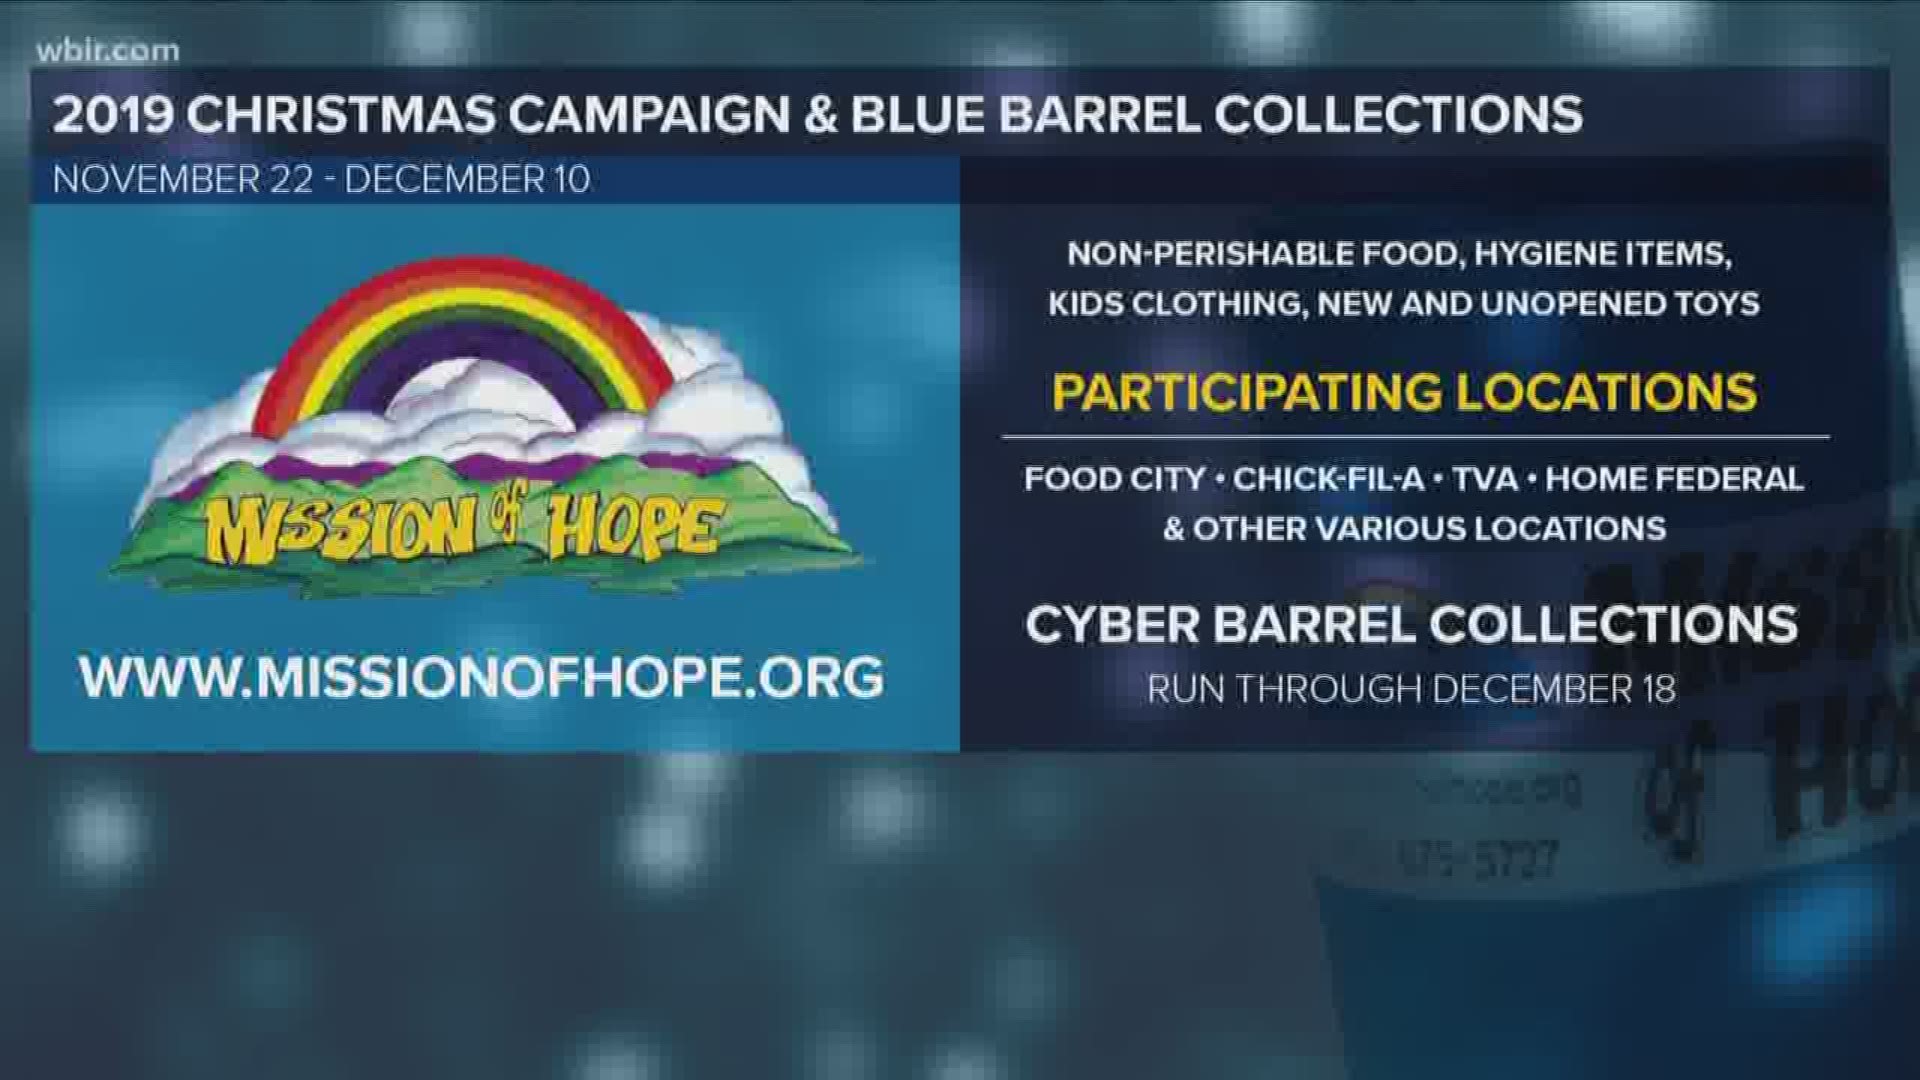 The Blue Barrel Christmas Drive wraps up Tuesday, December 10. The online Cyber Barrel collection continues through December 18. missionofhope.org